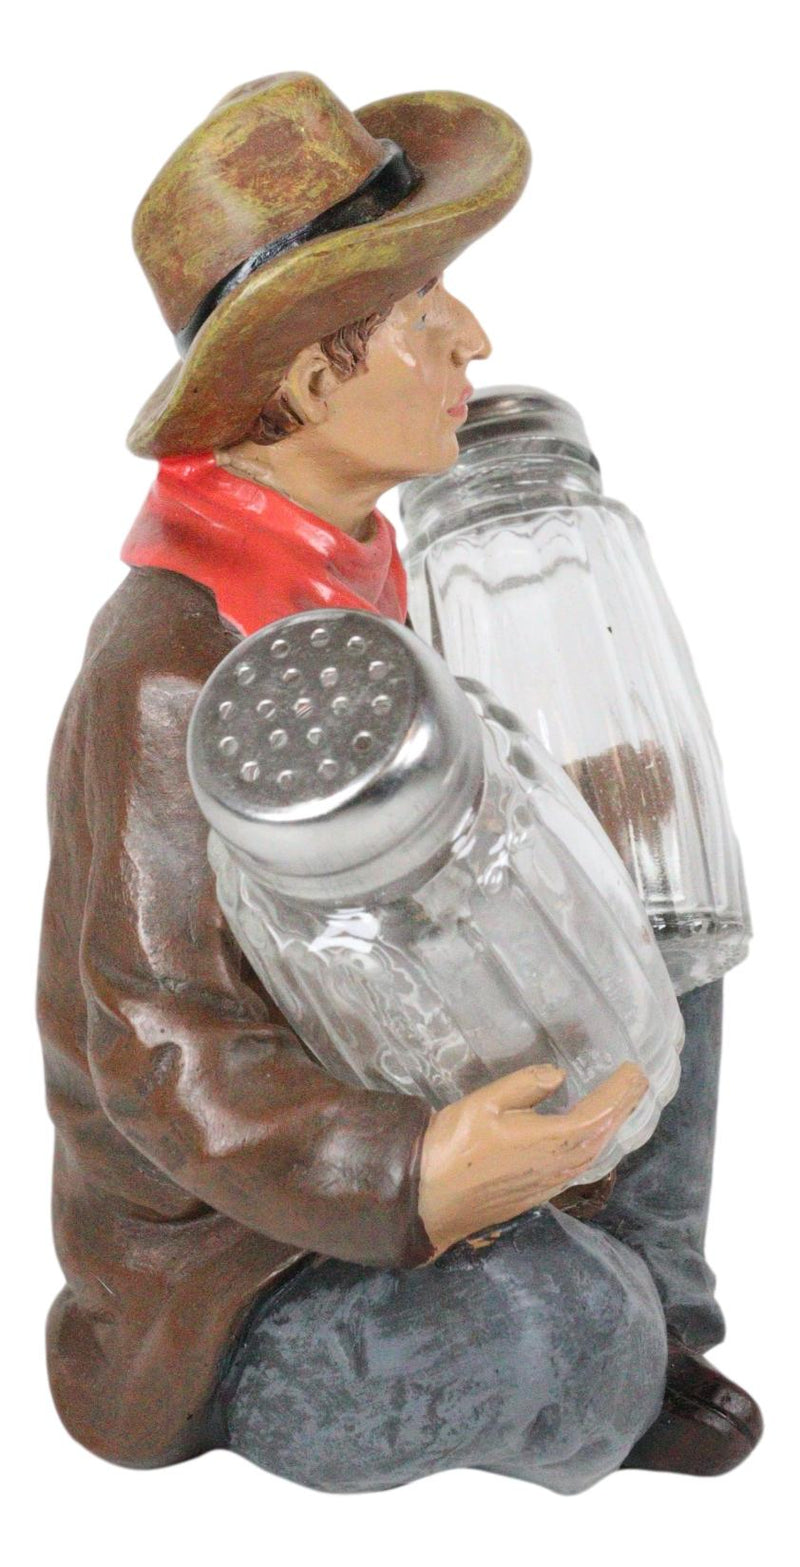 Western Cowboy Kissing Cowgirl Magnetic Ceramic Salt And Pepper Shakers Set